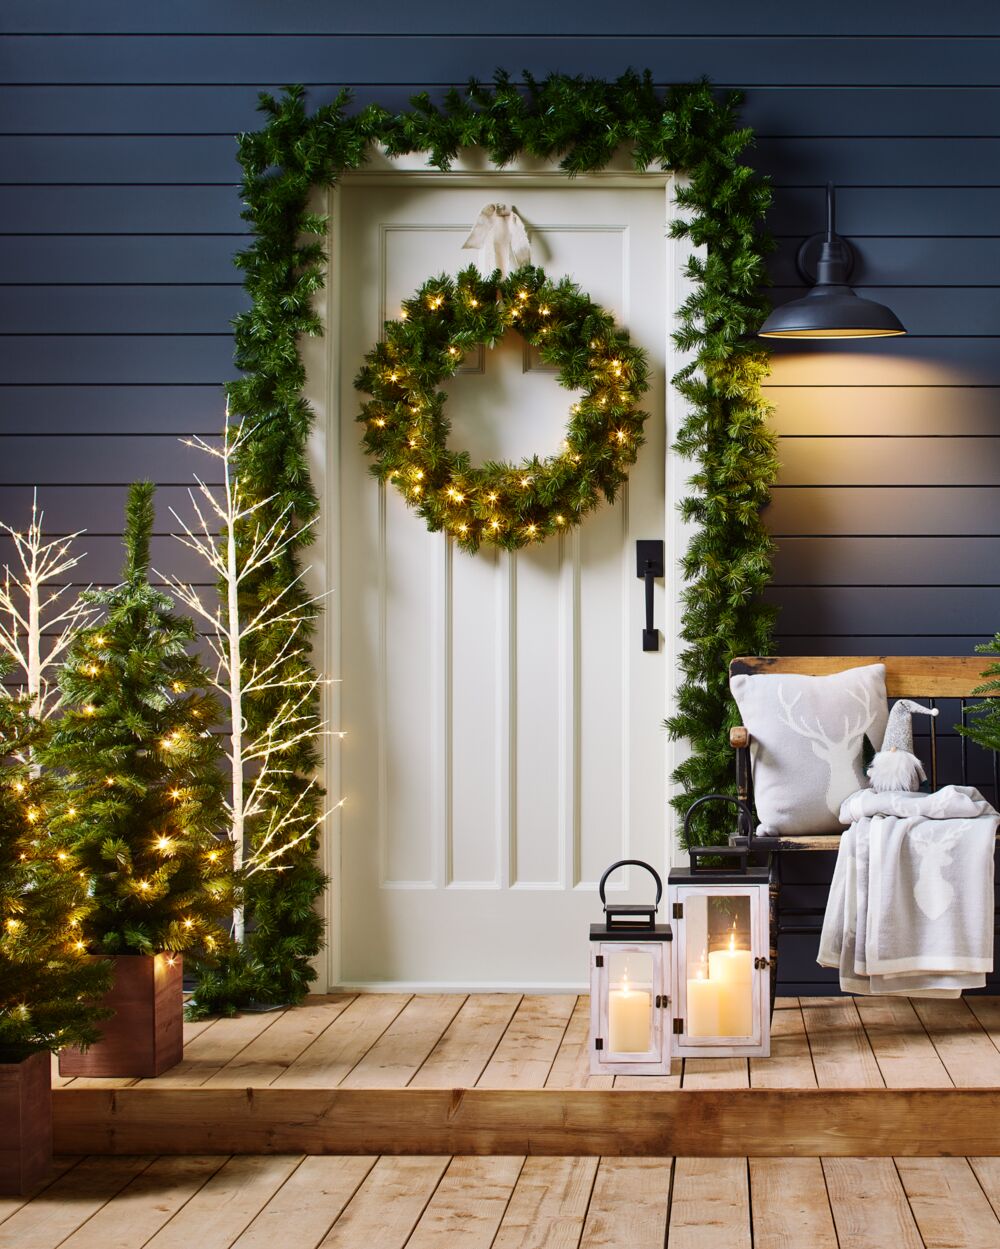 Ideas to decorate your porch for the holidays